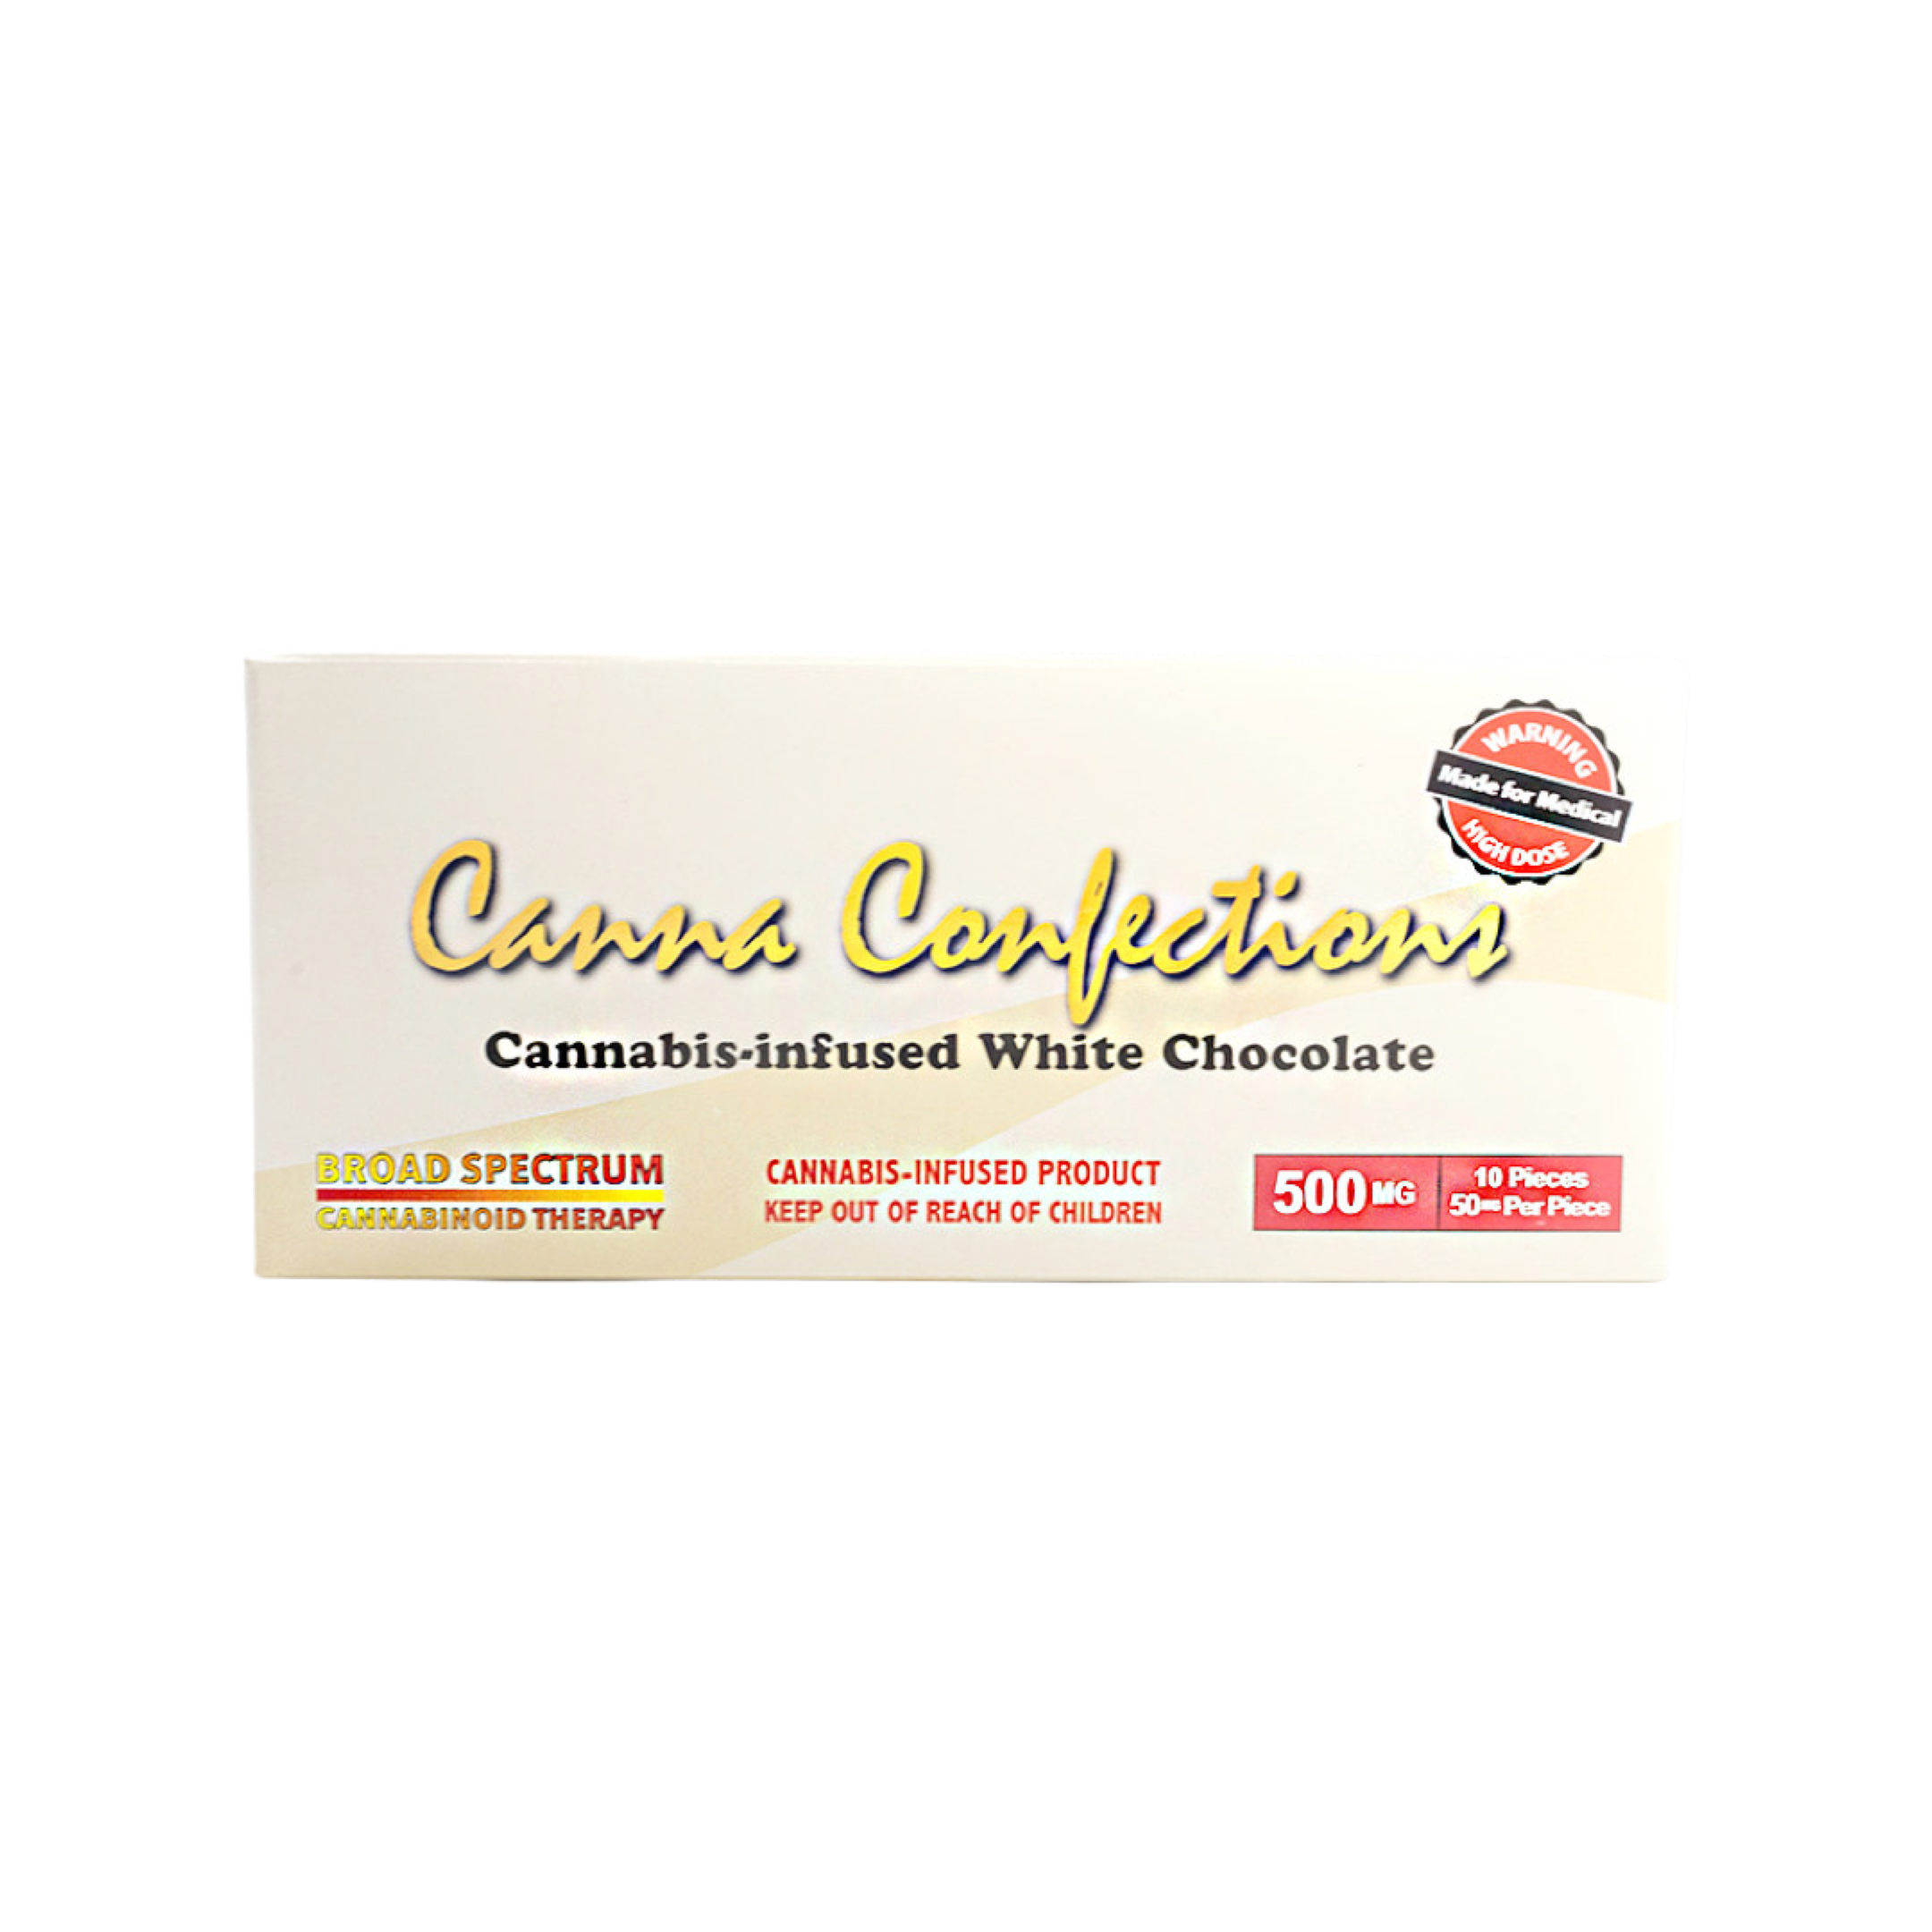 Canna Confections White Chocolate 500mg Trans